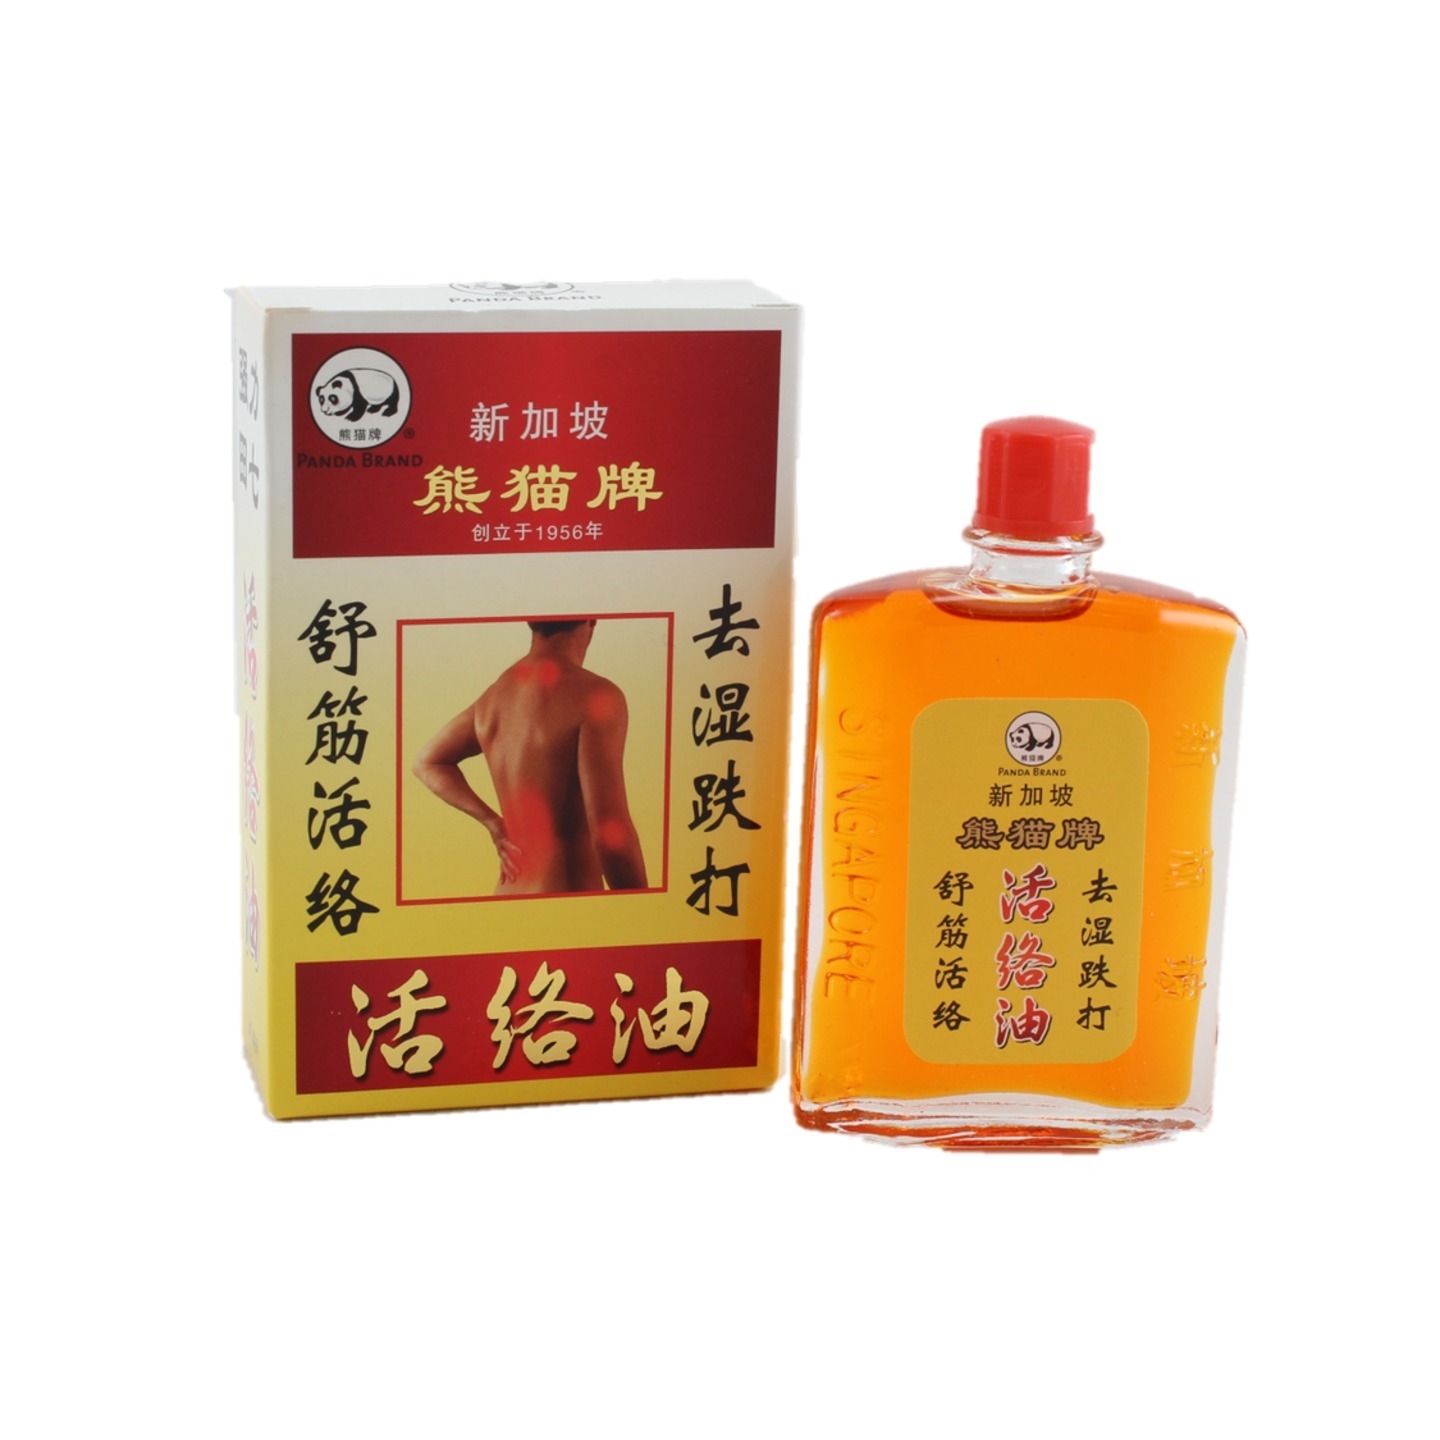 Medicated Oil 活络油